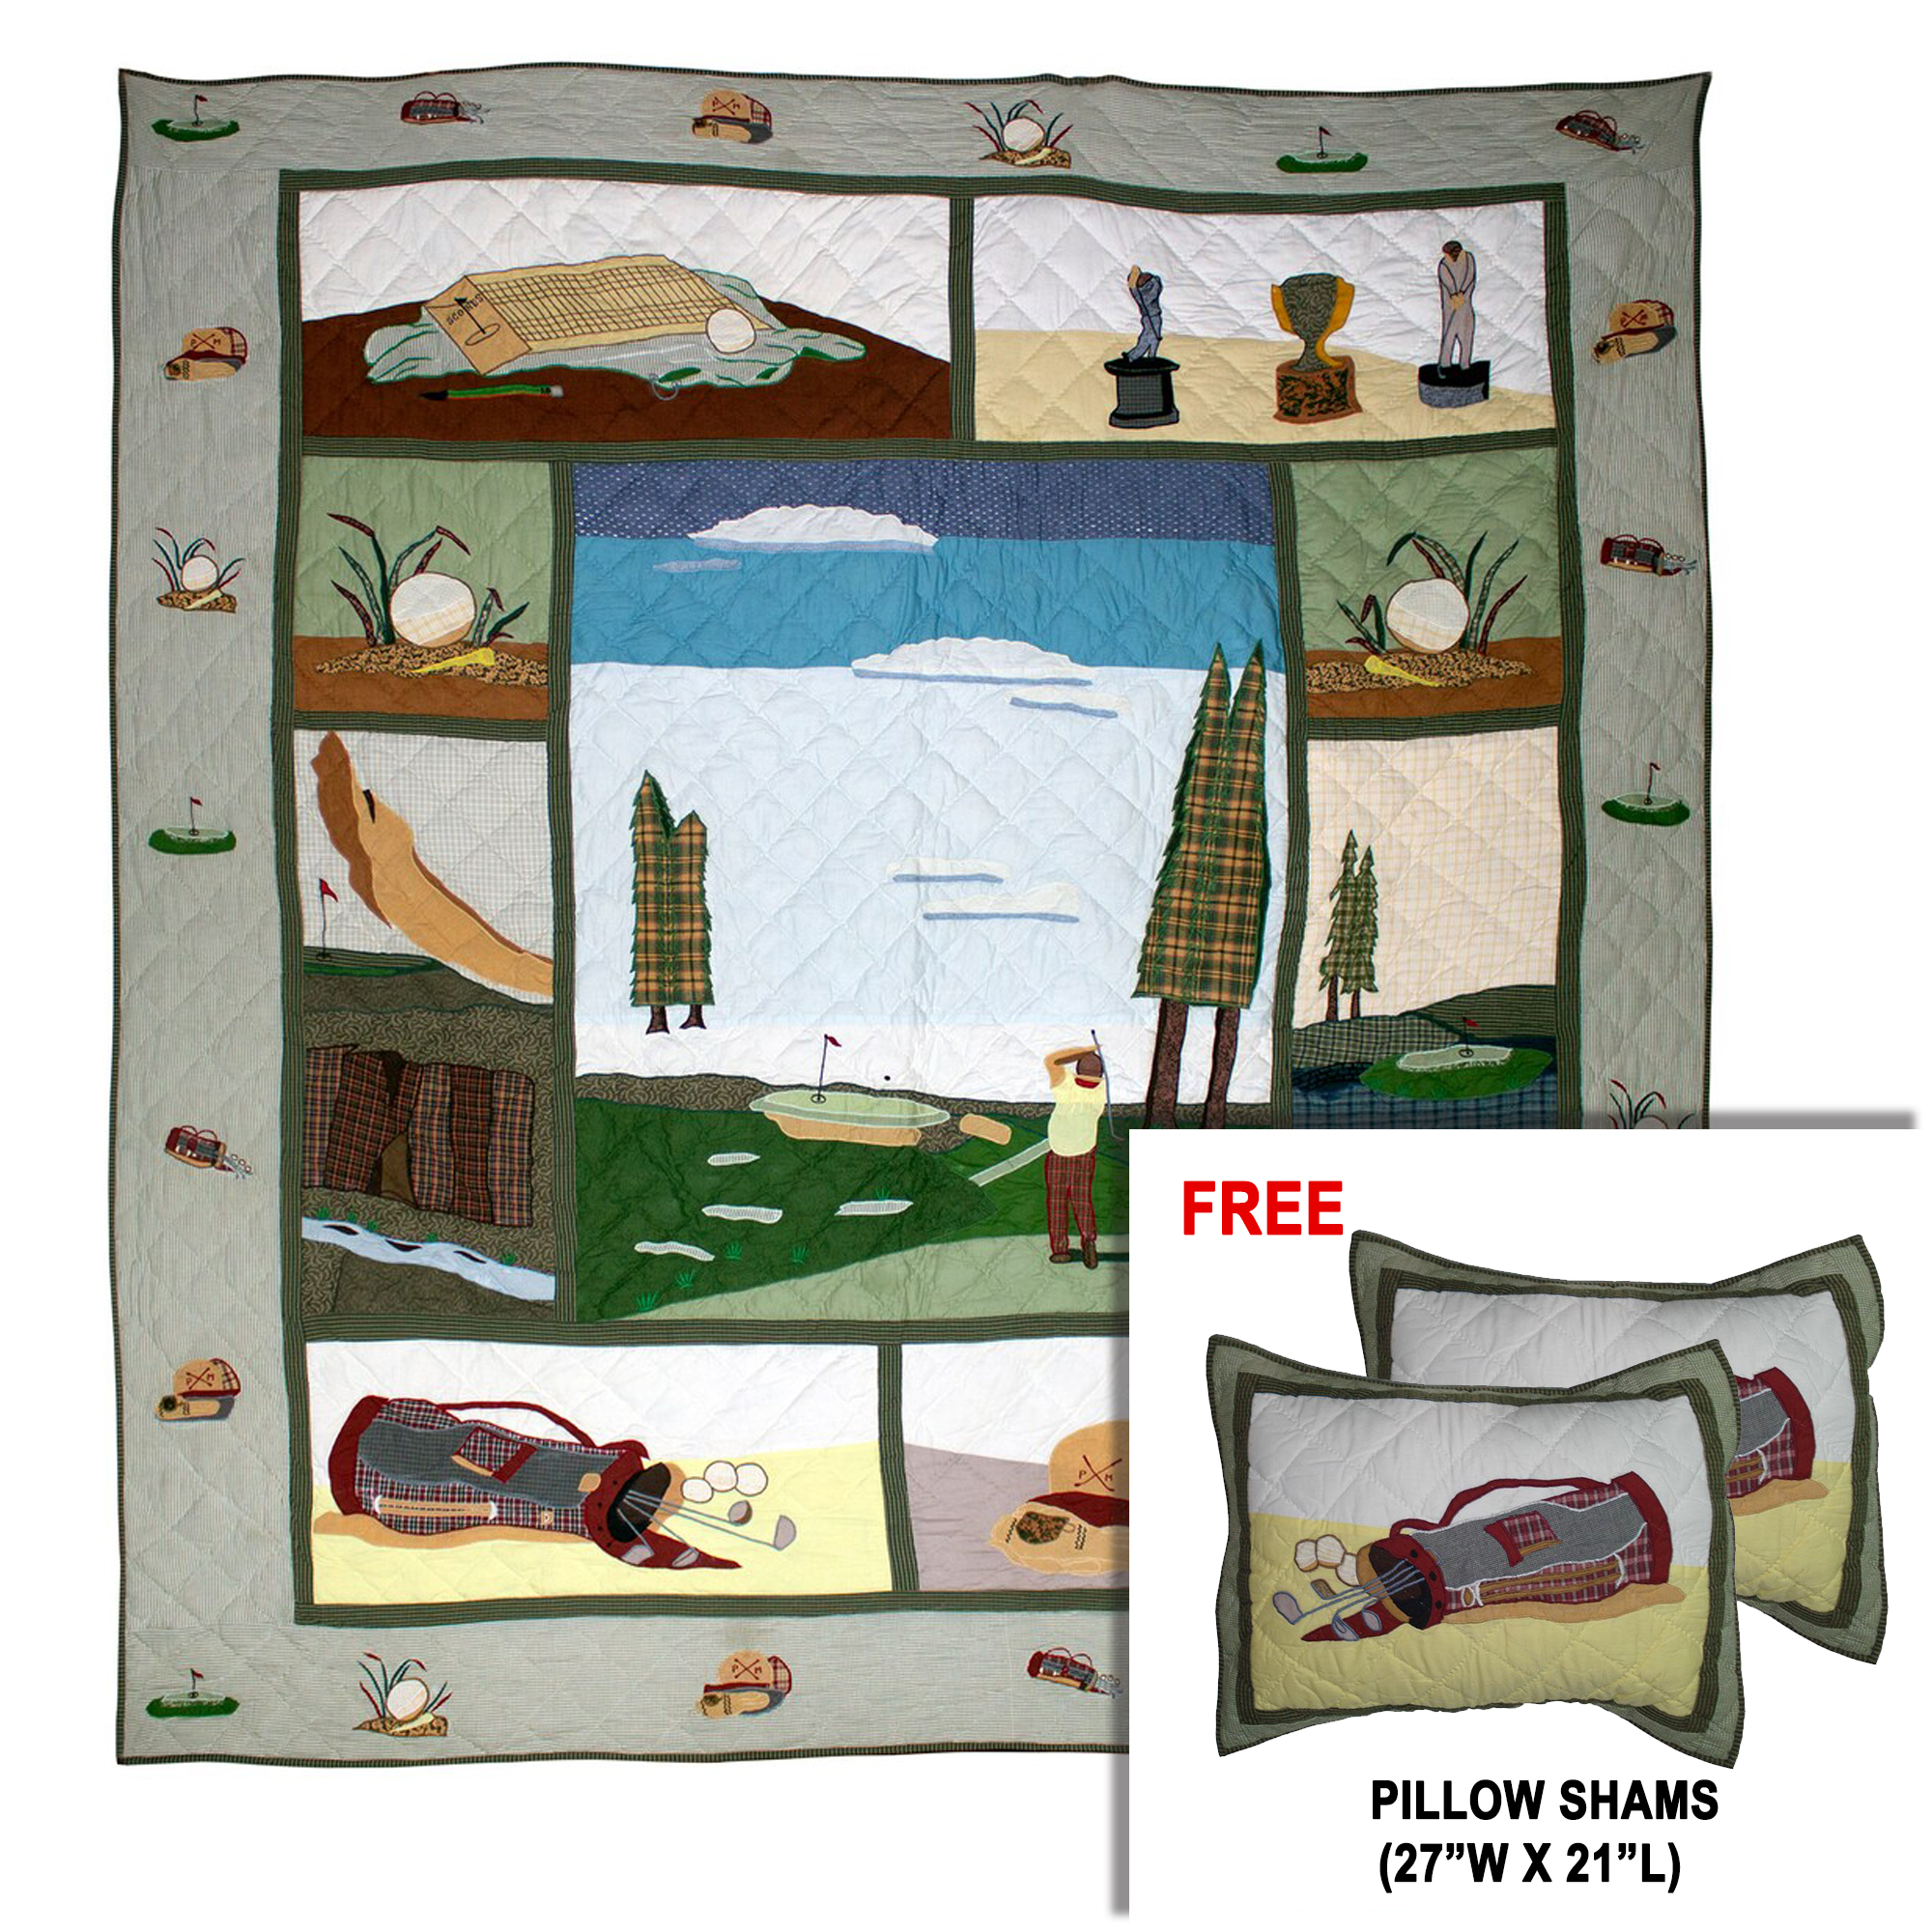 Golf a Gift King Quilt 105"W x 95"L | Buy a King Quilt and get a Matching Pillow Shams (27"W x 21"L) FREE